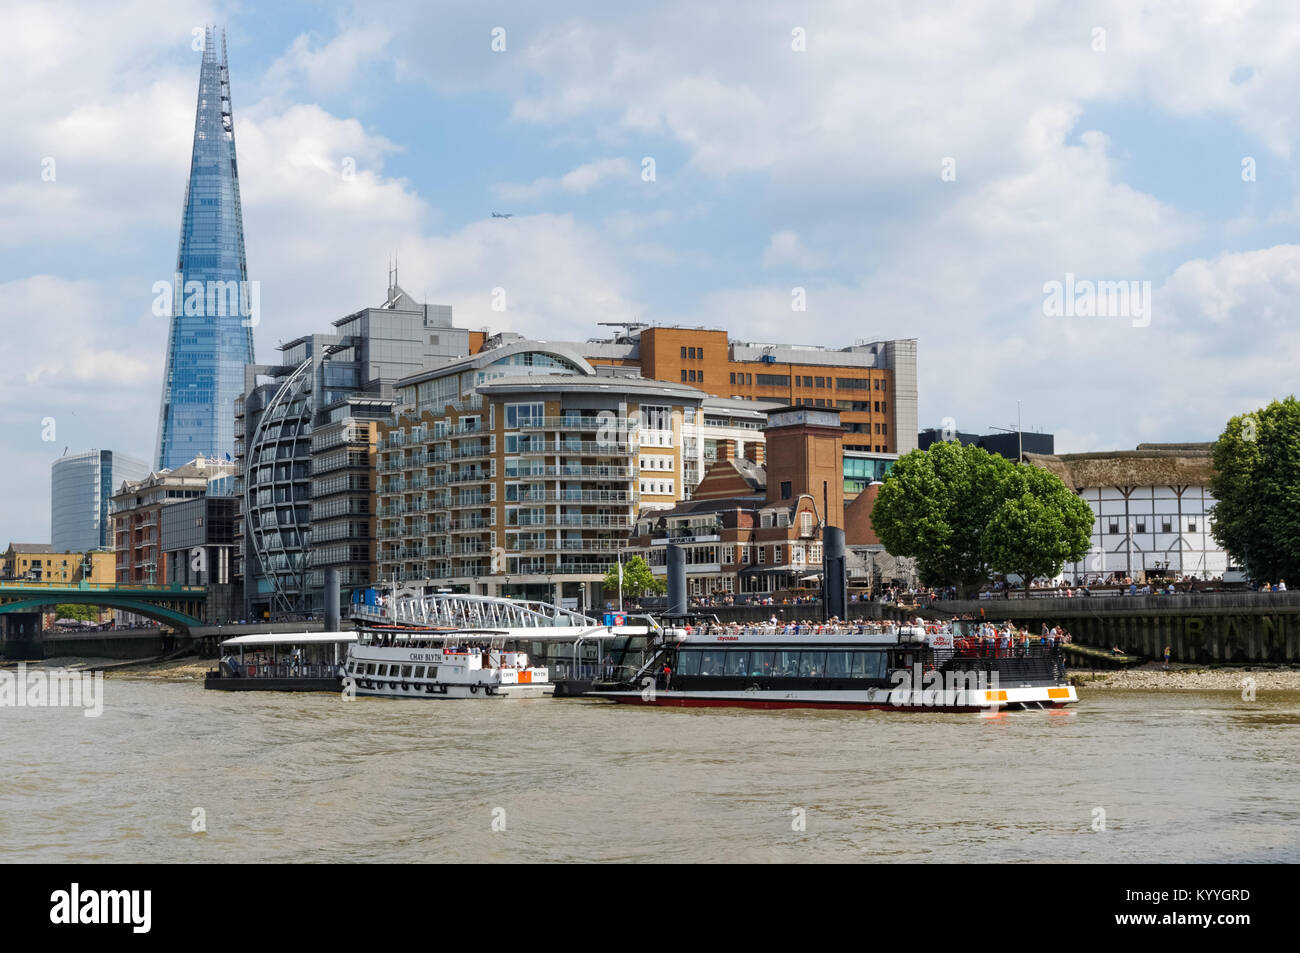 Bankside Pier with the Shard skyscraper in the background, London, England, United Kingdom, UK Stock Photo